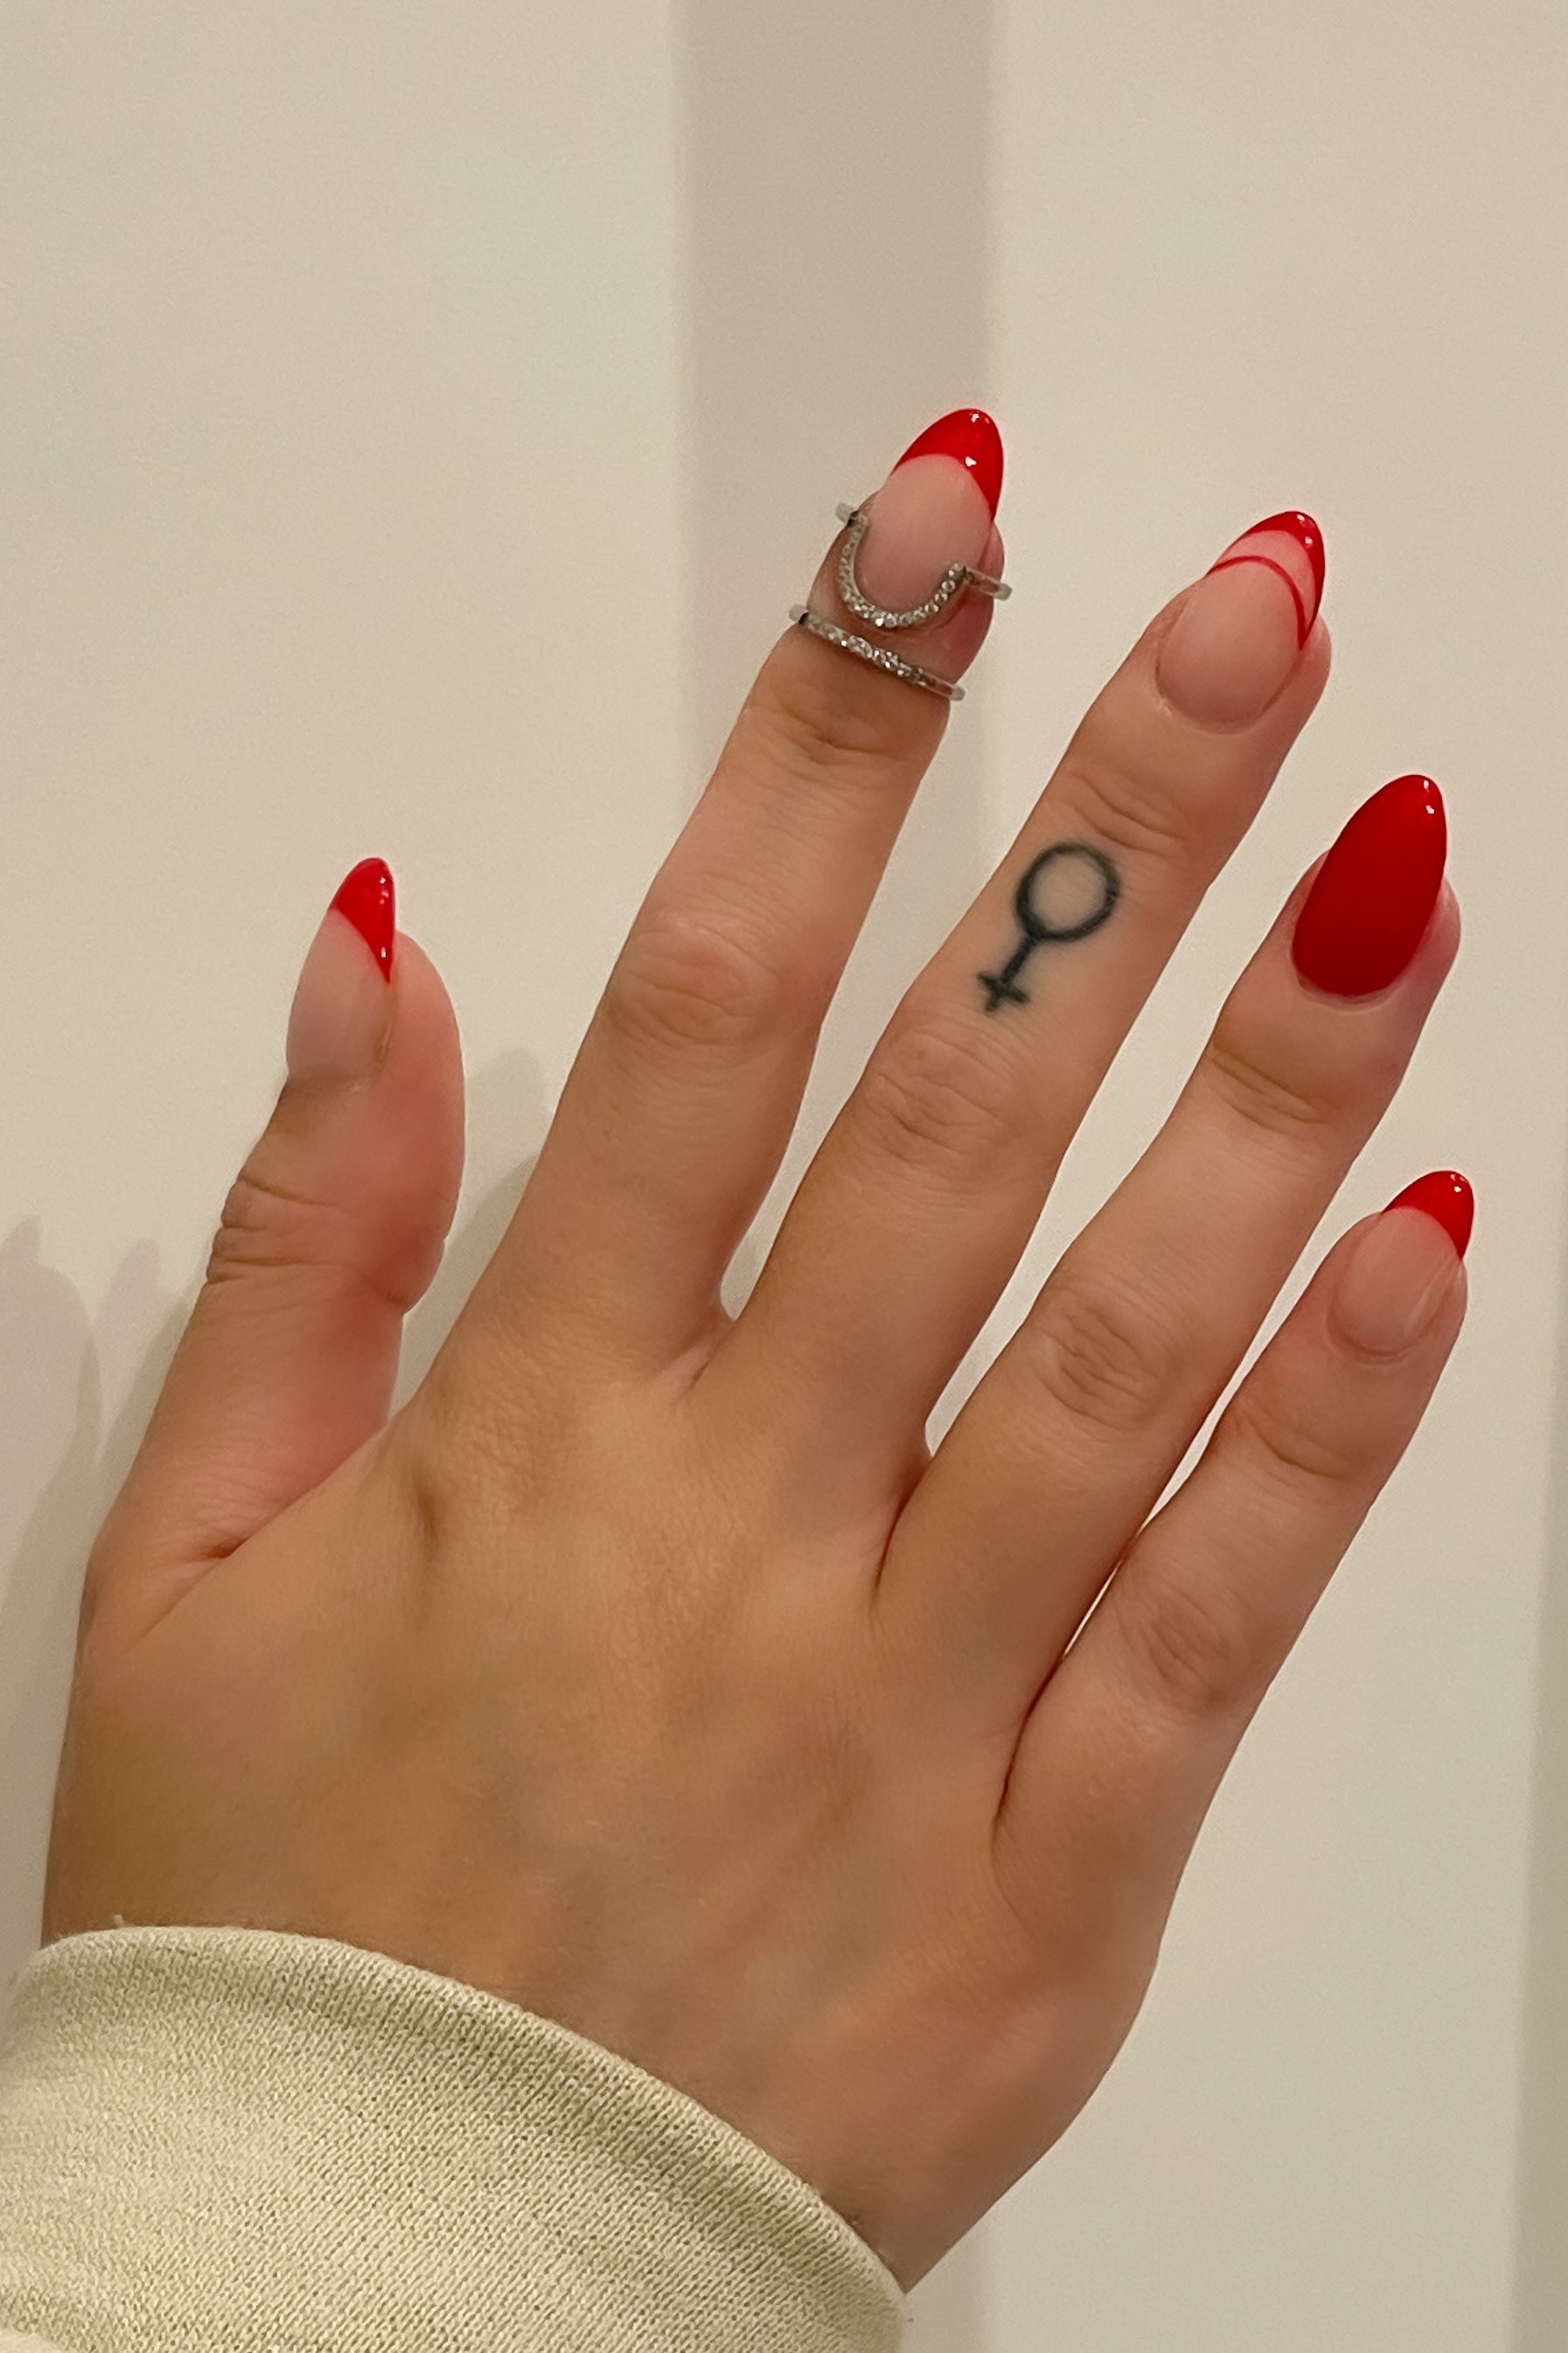 The Half-Moon Manicure Is The Fall Nail Art Trend Fashion Girls Love